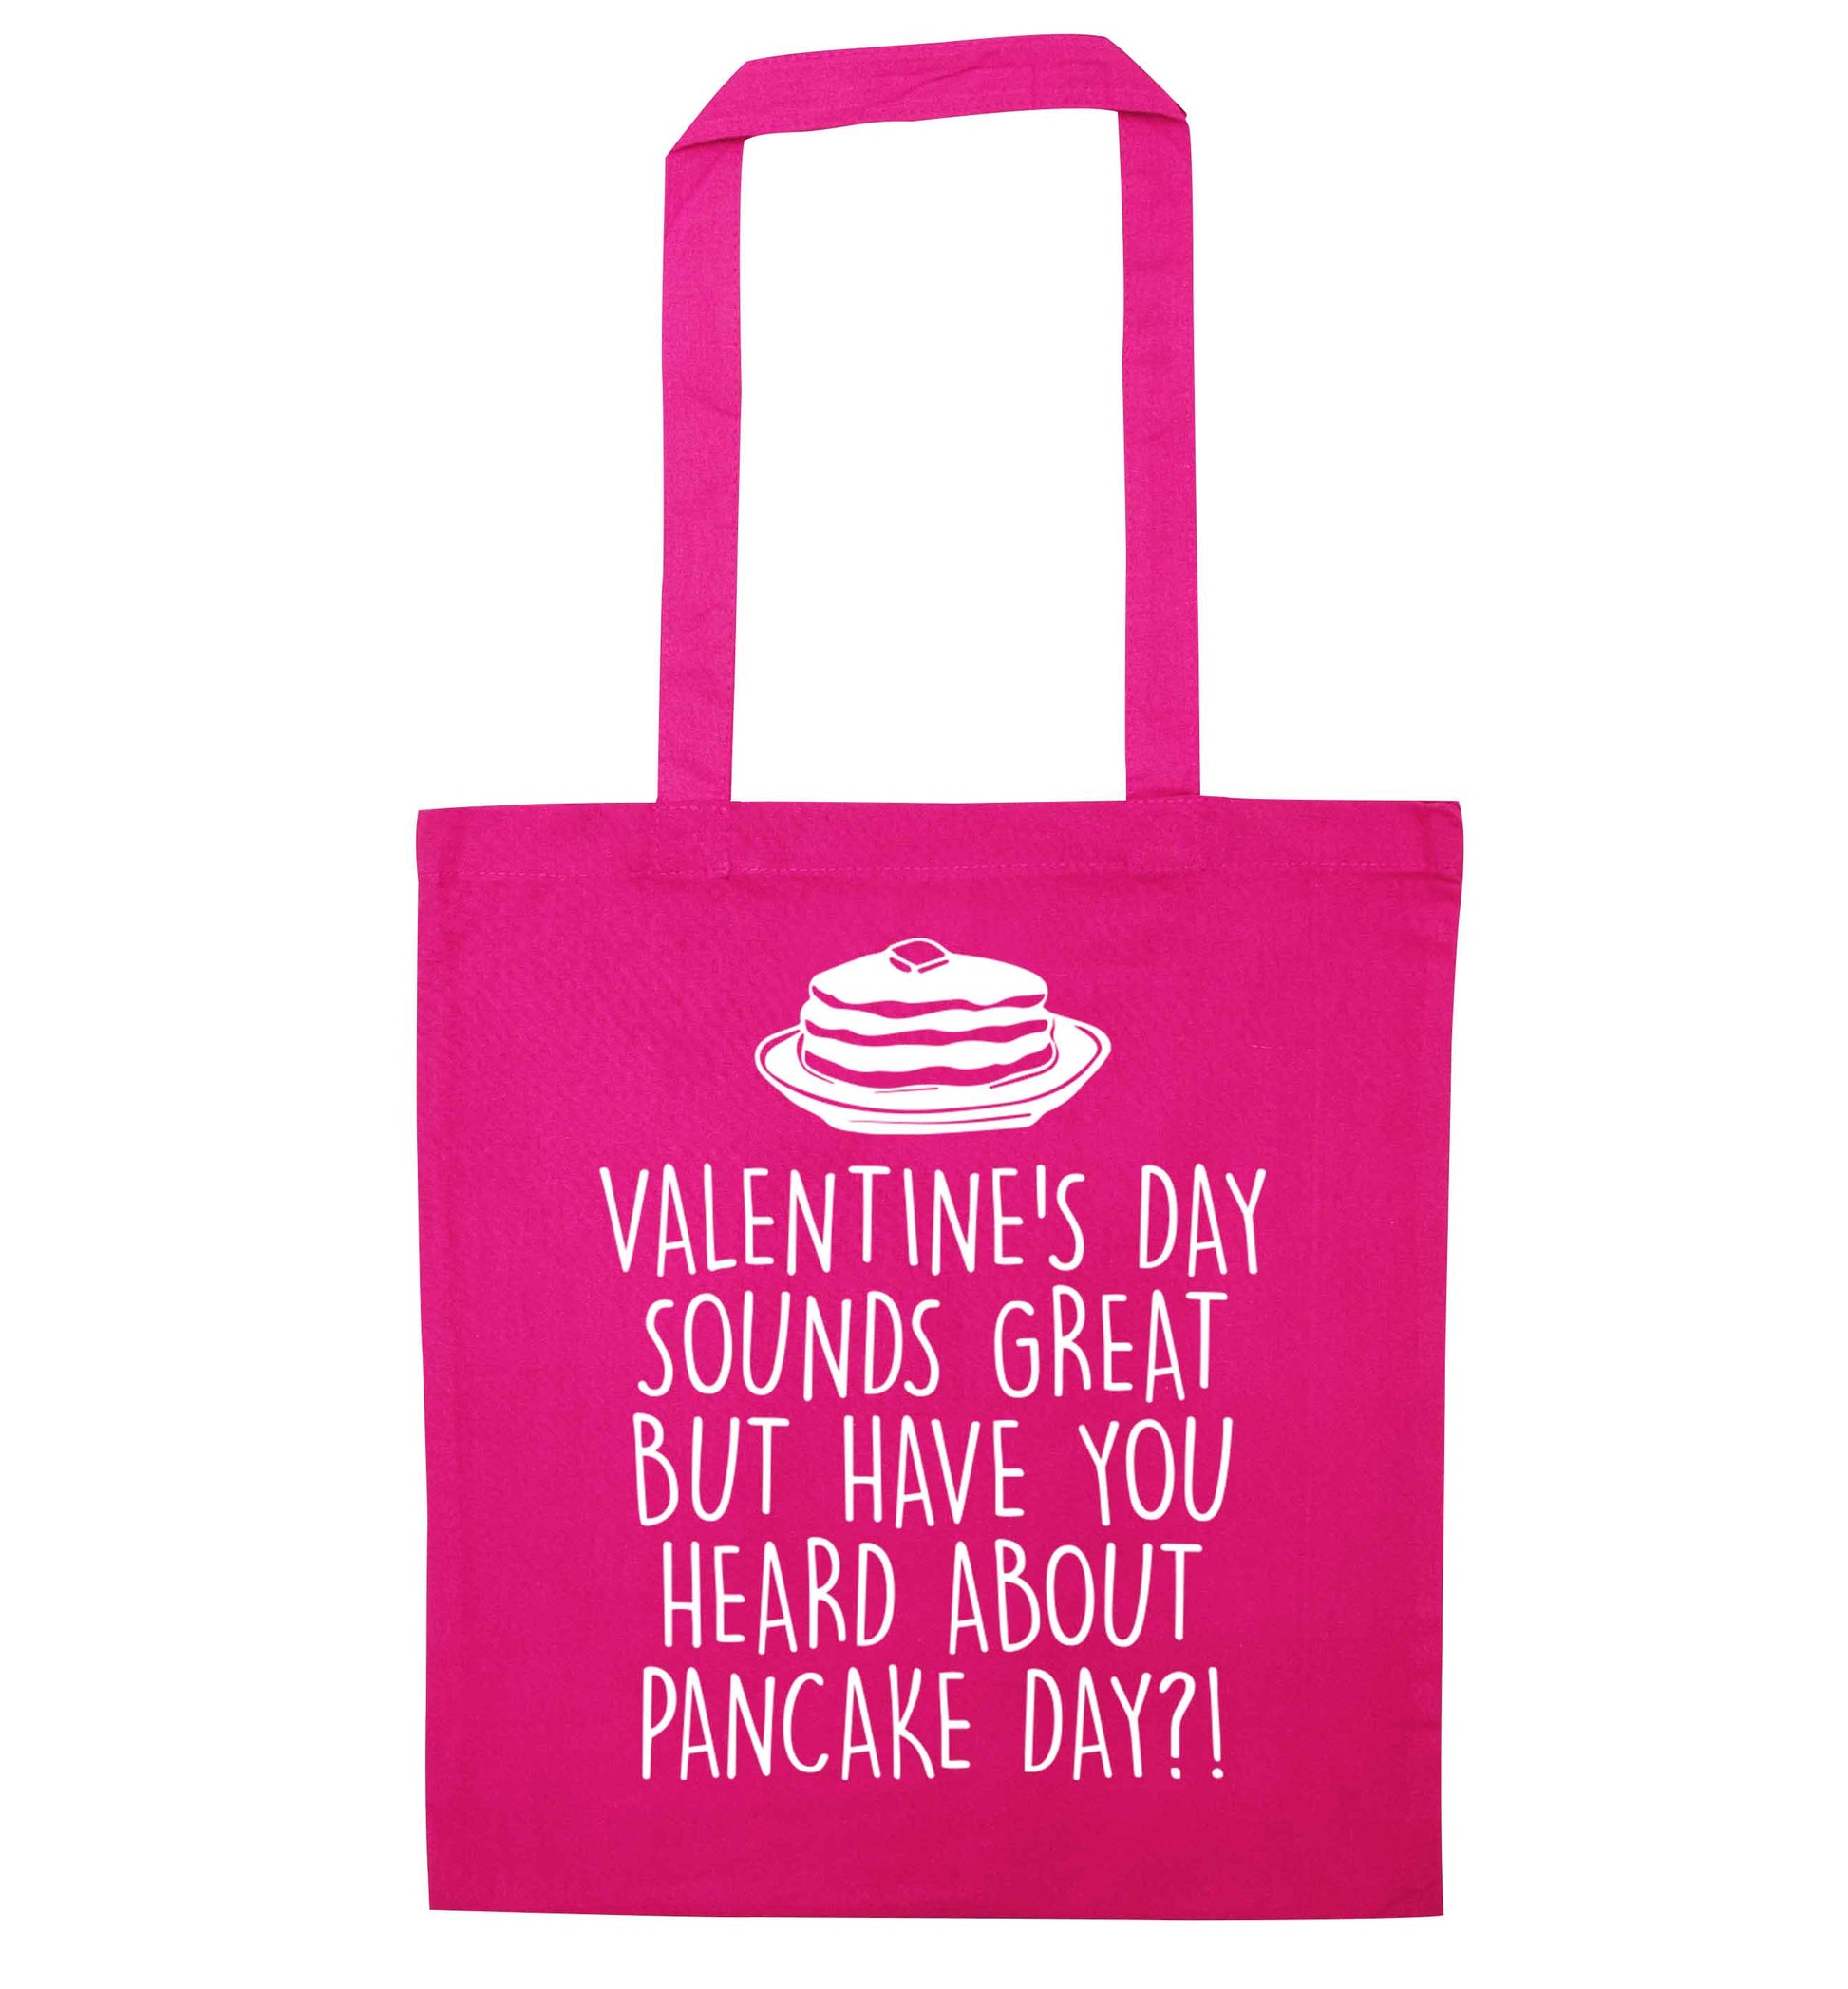 Valentine's day sounds great but have you heard about pancake day?! pink tote bag